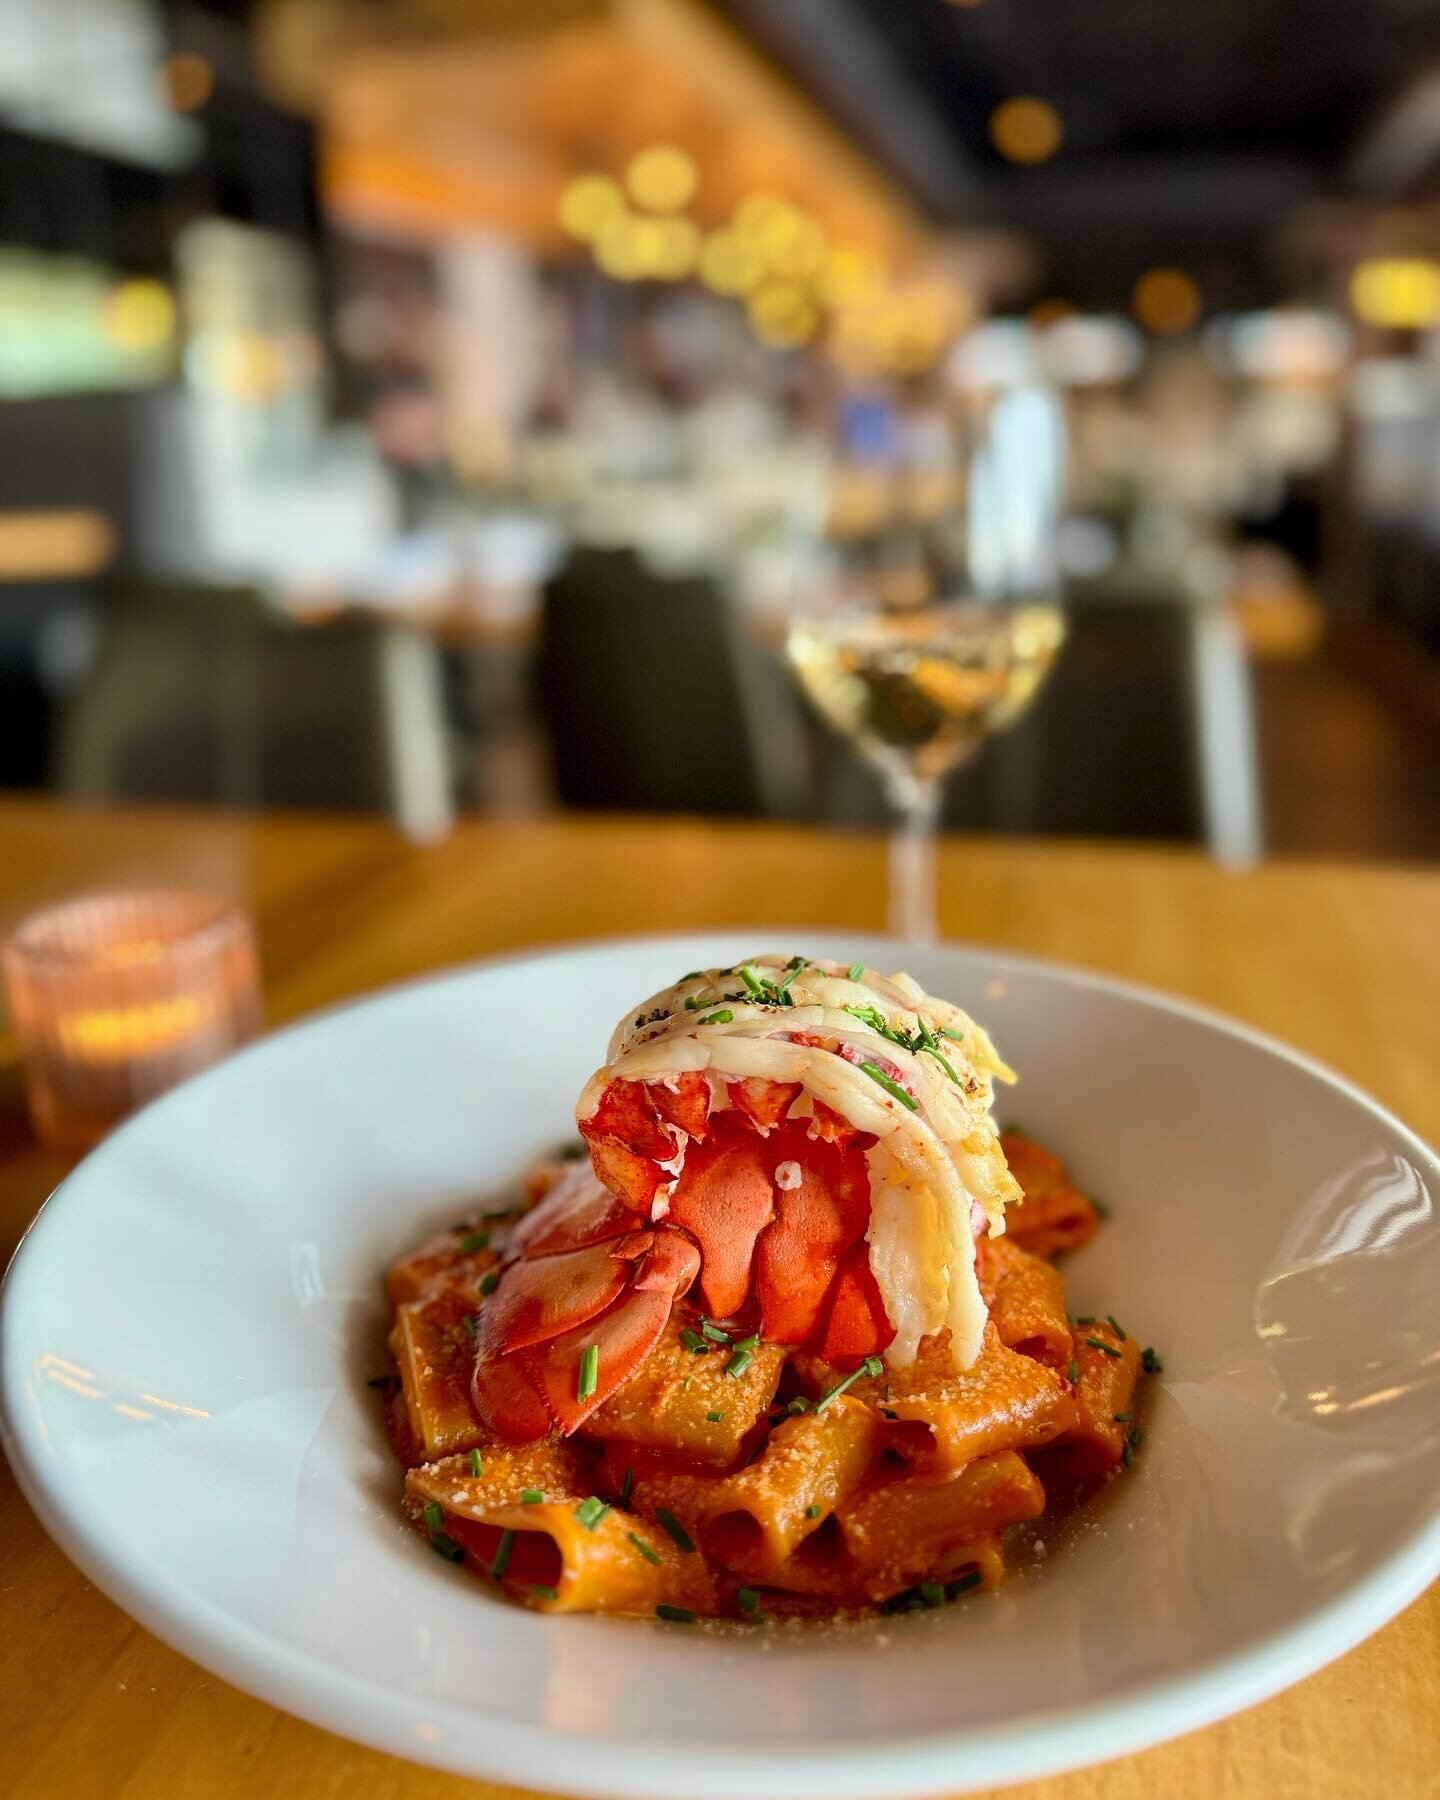 Valentine&rsquo;s Day is 6 days away! Reserve your table now with the link in our bio! 

#willyoubemyvalentine #dallasdining #lakehighlands #lheats #whiterocklake #eastdallasdining #dinnerreservations #resy #lobster #vodkasauce #filetoscar #cremebrul